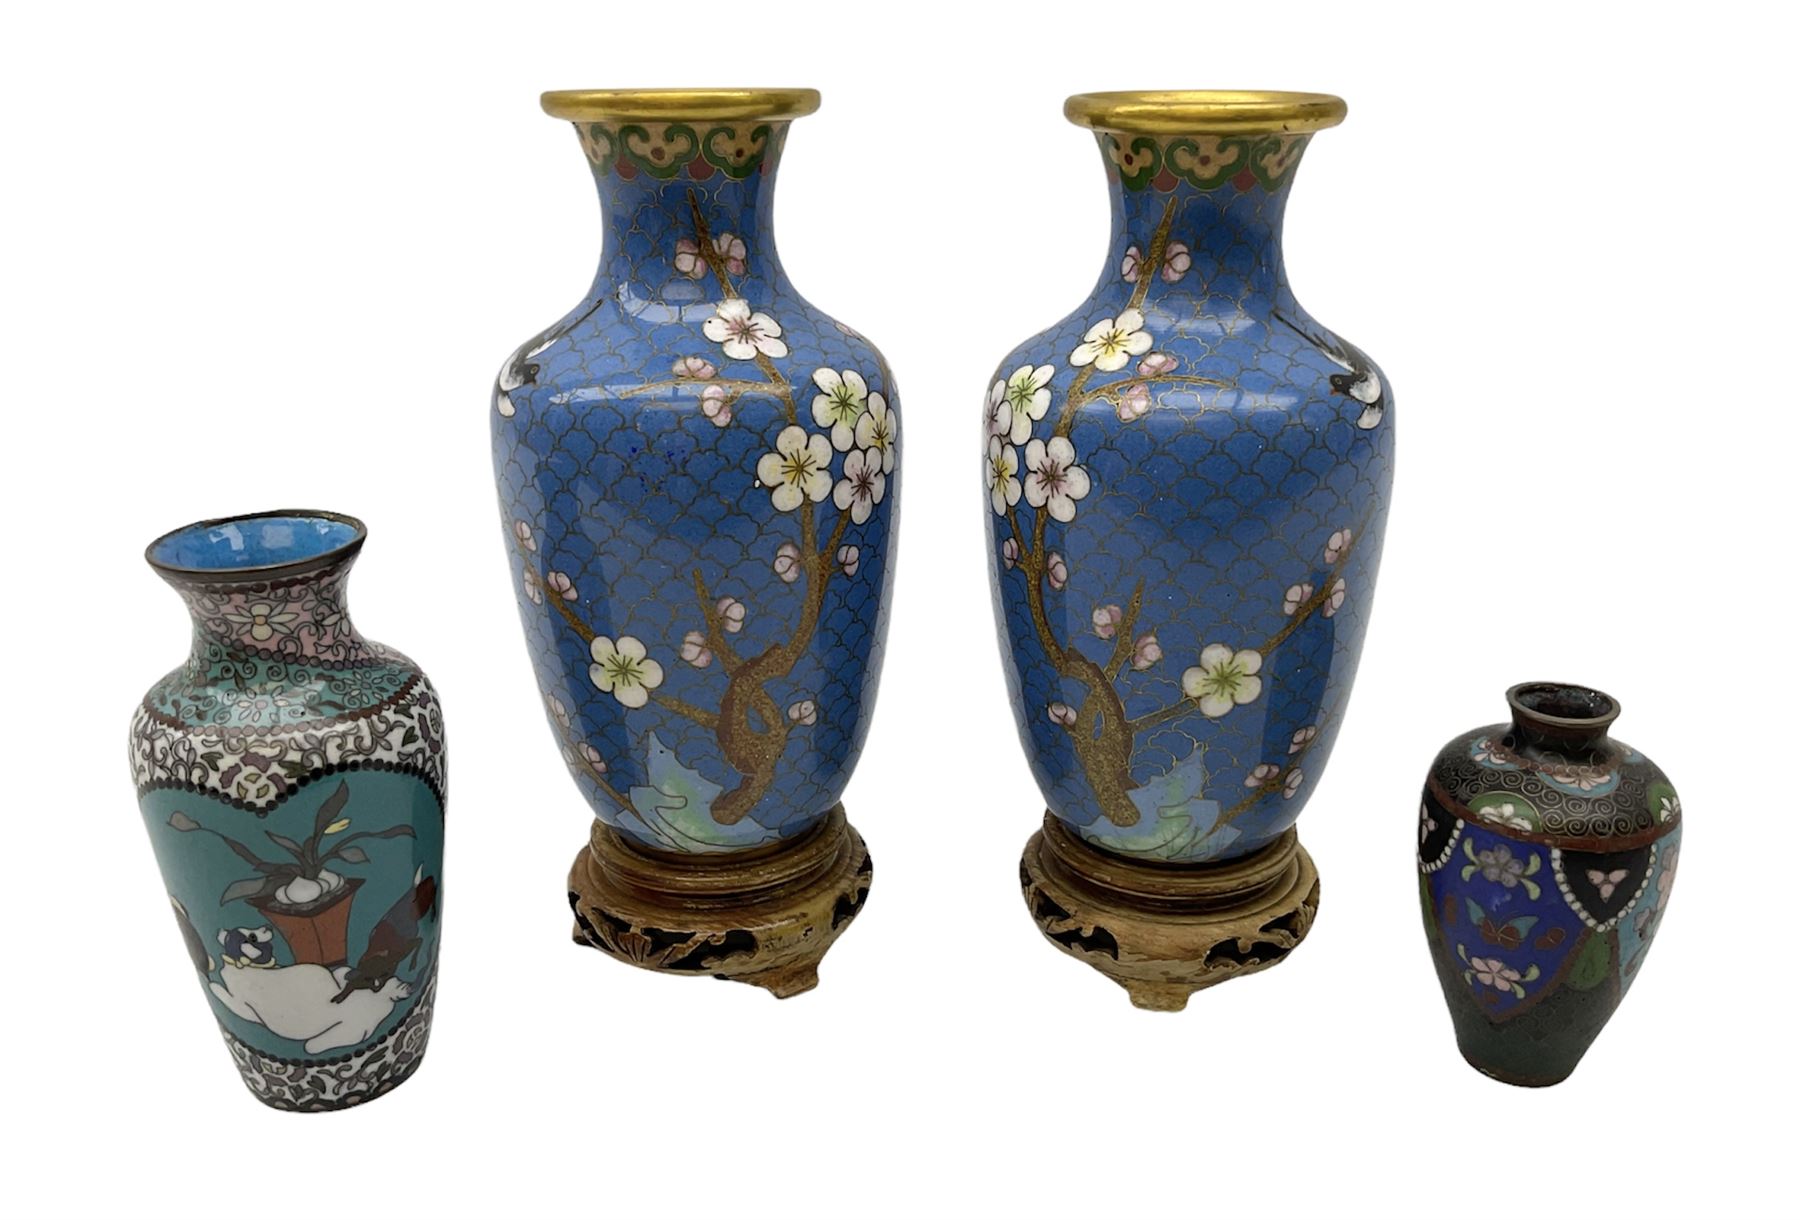 Pair of Chinese cloisonne vases on wooden stands